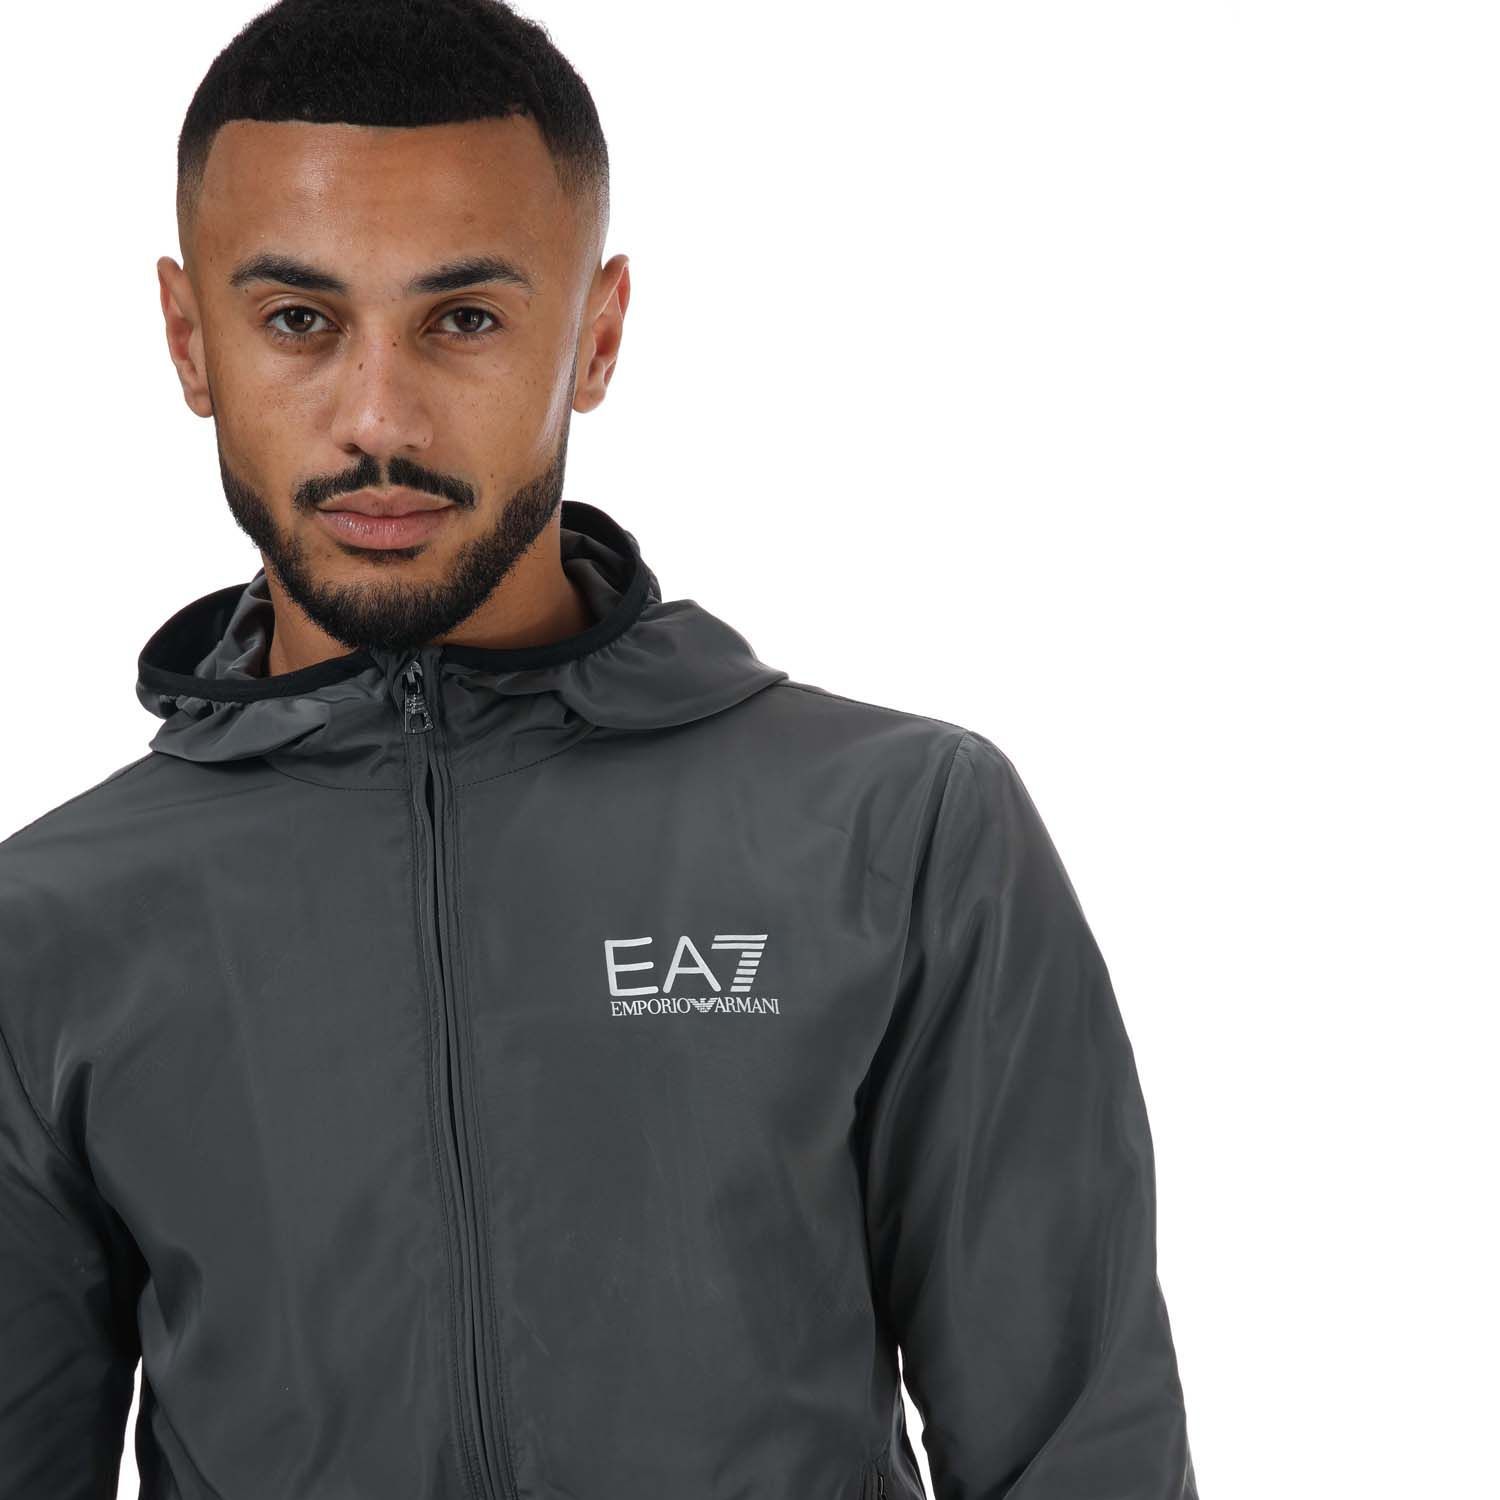 Mens Emporio Armani EA7 Fundamental Sporty Blouson Jacket in grey.- Attached drawstring hood.- Long sleeves.- Full zip fastening.- Two zipped front pockets.- Elasticated cuffs.- Contrasting EA7 logo on the chest.- 100% Polyester.- Ref: 8NPB04NN7Z1977